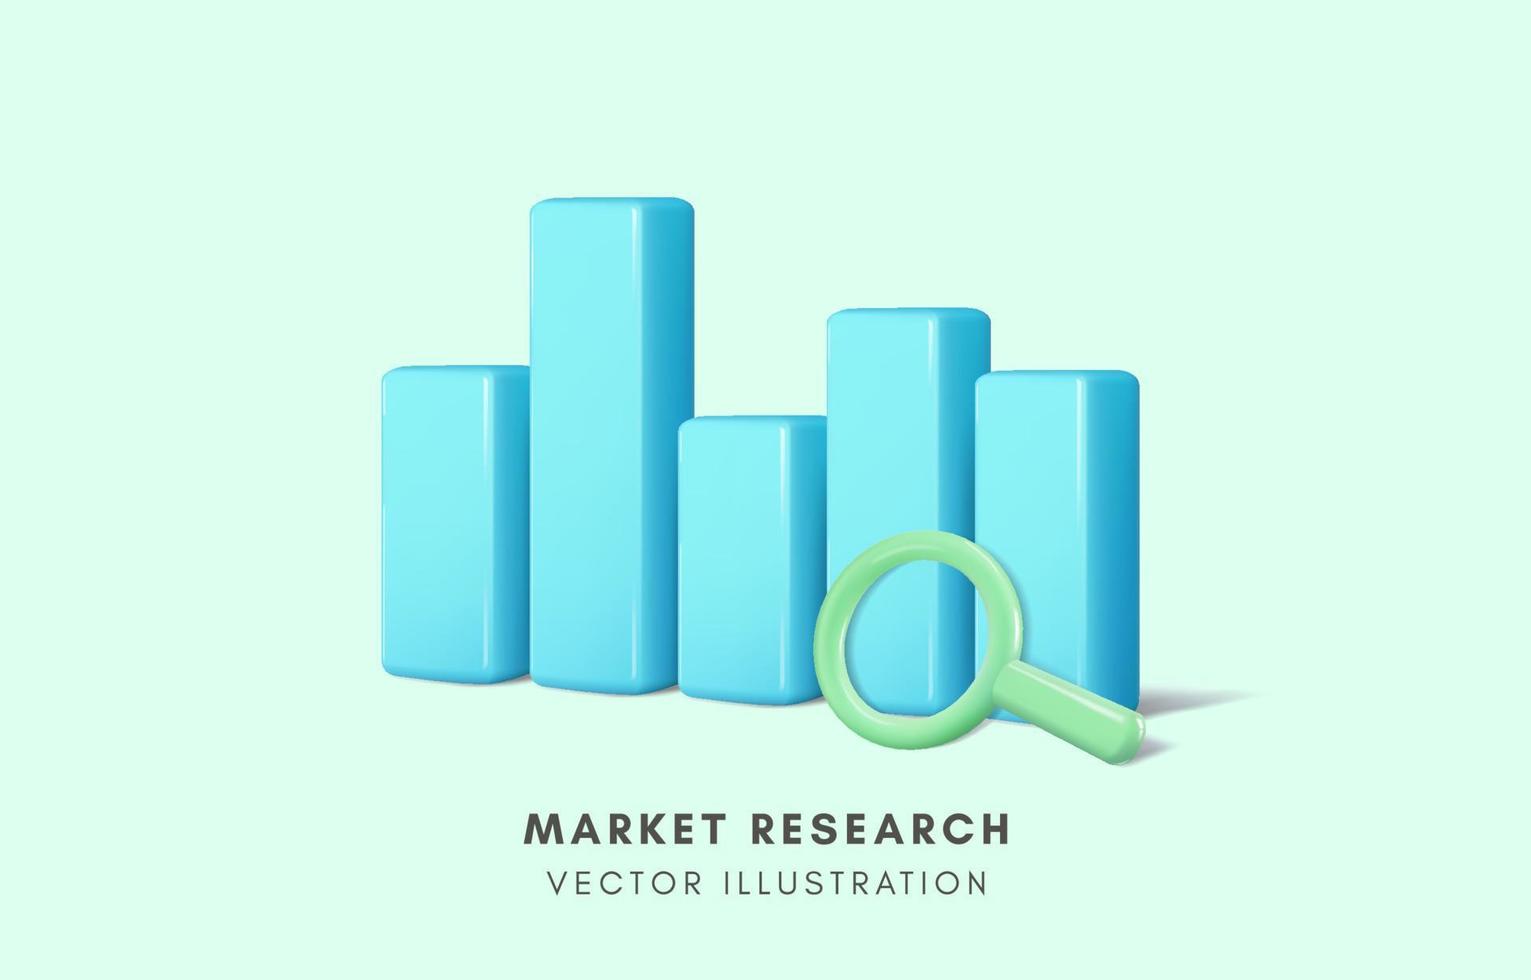 3D bar graph and magnifying glass, market research, business data analysis concept, Vector illustration.